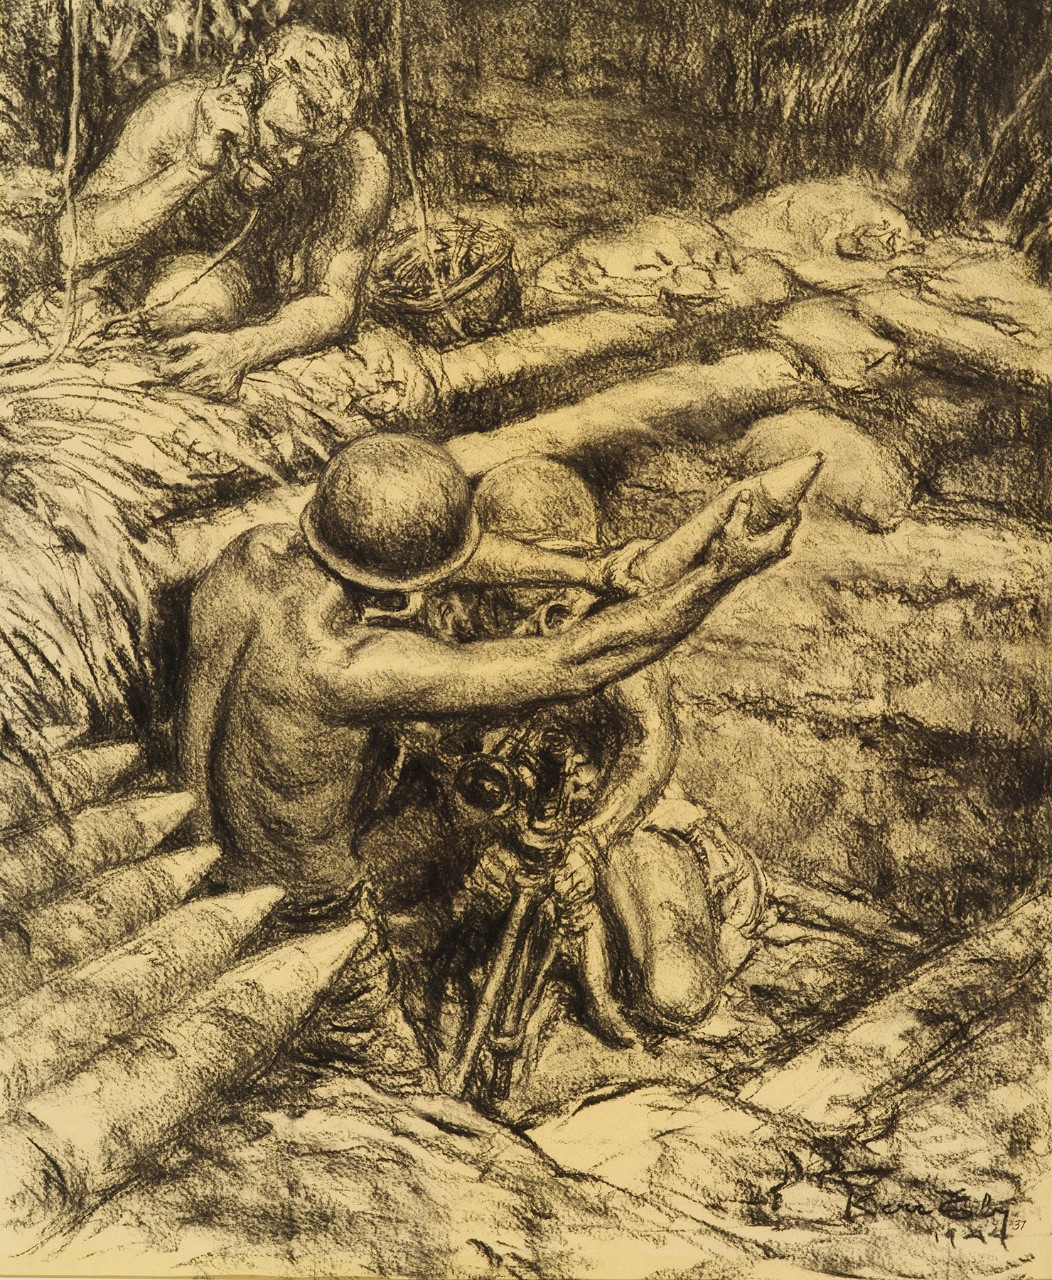 Marines loading a mortar in a foxhole